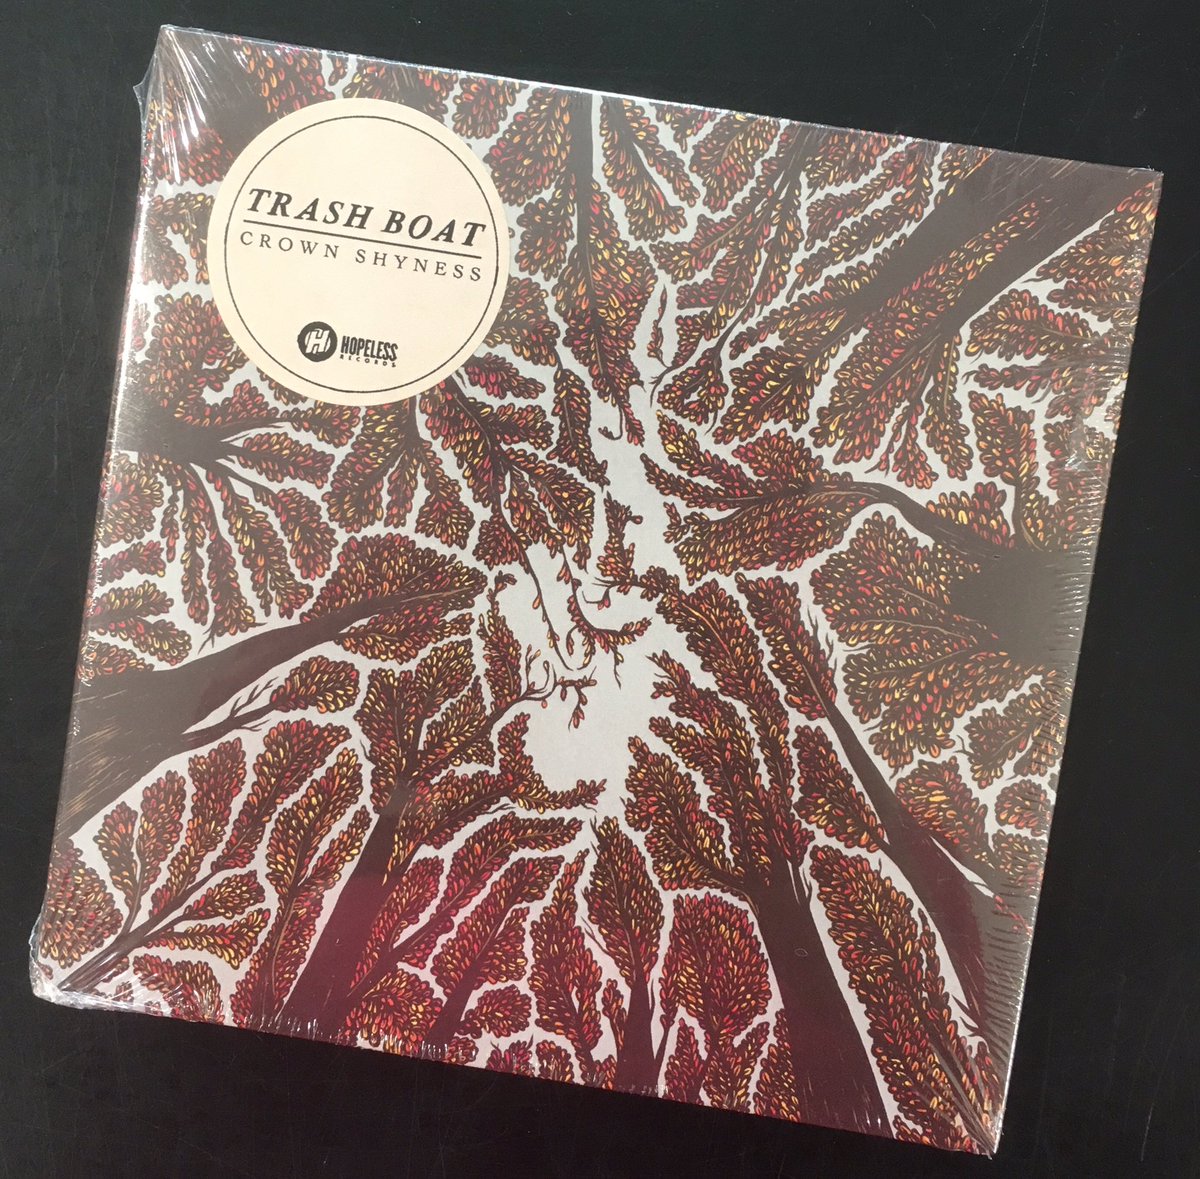 Our #AOTD today is the terrific new @TrashBoatUK album #CrownShyness, loving it! #HMVRecommends